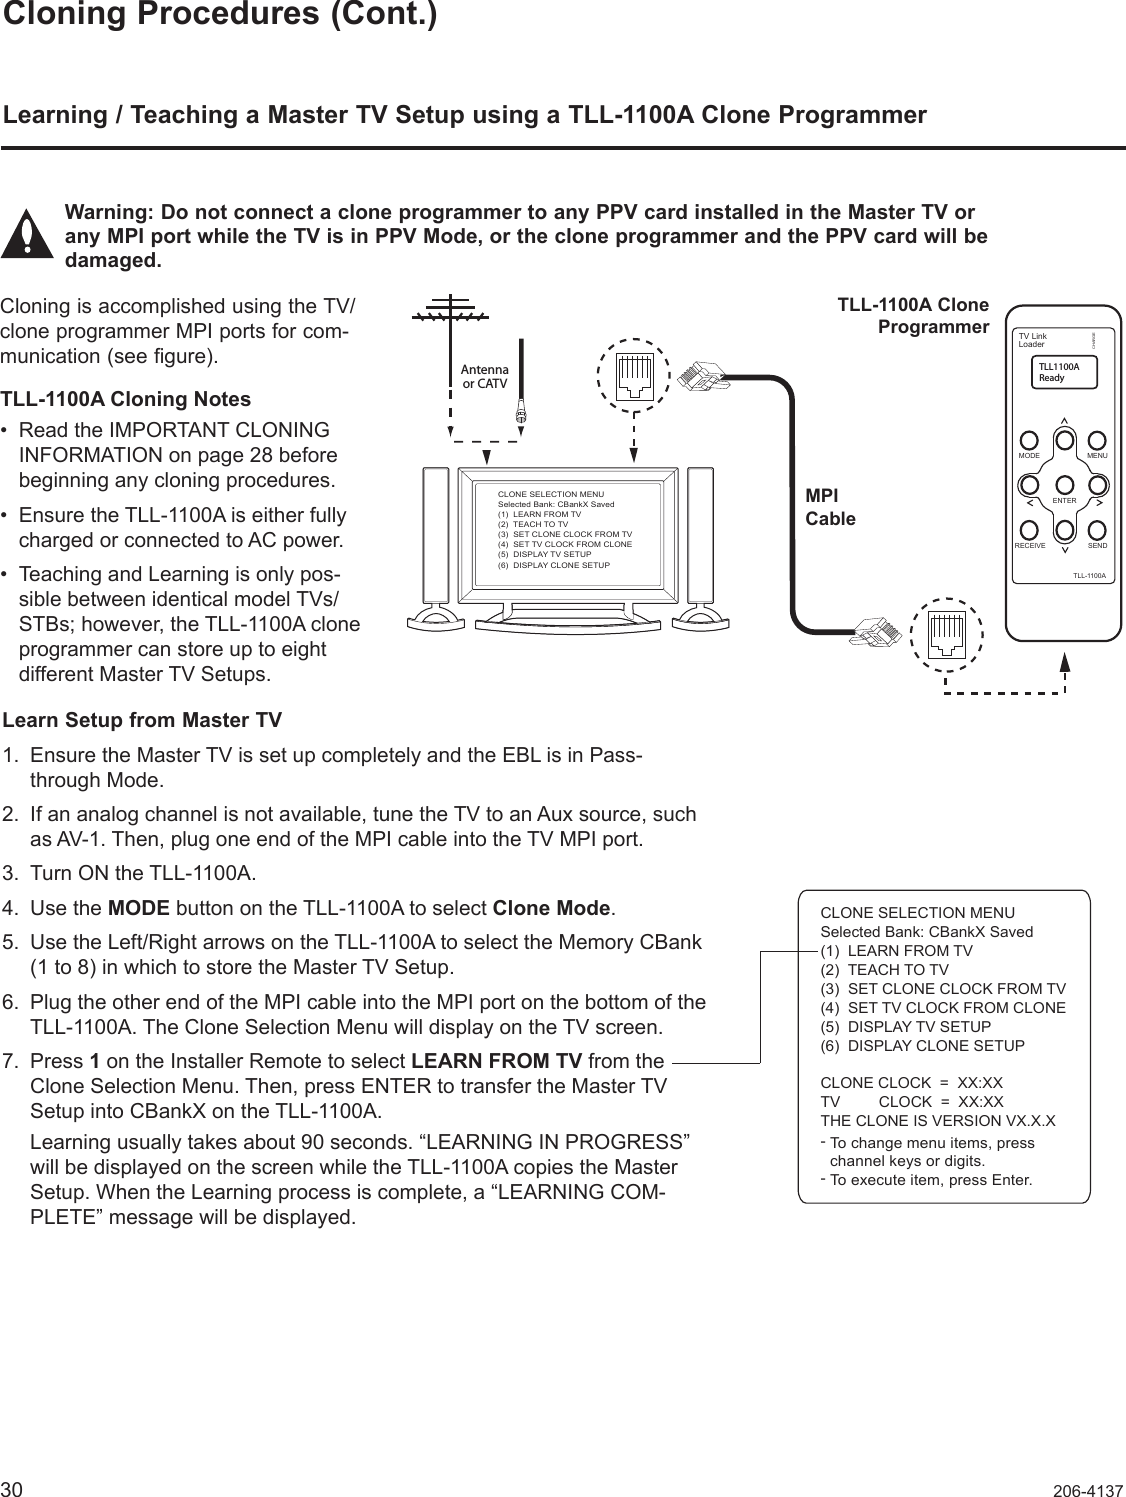 30 206-4137Cloning Procedures (Cont.)Learning / Teaching a Master TV Setup using a TLL-1100A Clone ProgrammerLearn Setup from Master TV1.  Ensure the Master TV is set up completely and the EBL is in Pass-through Mode. 2.  If an analog channel is not available, tune the TV to an Aux source, such as AV-1. Then, plug one end of the MPI cable into the TV MPI port. 3.  Turn ON the TLL-1100A. 4.  Use the MODE button on the TLL-1100A to select Clone Mode.5.  Use the Left/Right arrows on the TLL-1100A to select the Memory CBank  (1 to 8) in which to store the Master TV Setup. 6.  Plug the other end of the MPI cable into the MPI port on the bottom of the  TLL-1100A. The Clone Selection Menu will display on the TV screen.7.  Press 1 on the Installer Remote to select LEARN FROM TV from the Clone Selection Menu. Then, press ENTER to transfer the Master TV Setup into CBankX on the TLL-1100A.     Learning usually takes about 90 seconds. “LEARNING IN PROGRESS” will be displayed on the screen while the TLL-1100A copies the Master Setup. When the Learning process is complete, a “LEARNING COM-PLETE” message will be displayed.Cloning is accomplished using the TV/clone programmer MPI ports for com-munication (see figure). TLL-1100A Cloning Notes• Read the IMPORTANT CLONING INFORMATION on page 28 before beginning any cloning procedures. • Ensure the TLL-1100A is either fully charged or connected to AC power. • Teaching and Learning is only pos-sible between identical model TVs/STBs; however, the TLL-1100A clone programmer can store up to eight  different Master TV Setups.CLONE SELECTION MENUSelected Bank: CBankX Saved(1)  LEARN FROM TV(2)  TEACH TO TV(3)  SET CLONE CLOCK FROM TV(4)  SET TV CLOCK FROM CLONE(5)  DISPLAY TV SETUP(6)  DISPLAY CLONE SETUPCLONE CLOCK  =  XX:XXTV         CLOCK  =  XX:XXTHE CLONE IS VERSION VX.X.X--To change menu items, presschannel keys or digits.To execute item, press Enter.Warning: Do not connect a clone programmer to any PPV card installed in the Master TV or any MPI port while the TV is in PPV Mode, or the clone programmer and the PPV card will be damaged.Antennaor CATVCLONE SELECTION MENUSelected Bank: CBankX Saved(1)  LEARN FROM TV(2)  TEACH TO TV(3)  SET CLONE CLOCK FROM TV(4)  SET TV CLOCK FROM CLONE(5)  DISPLAY TV SETUP(6)  DISPLAY CLONE SETUPTV LinkLoaderTLL1100AReadyTLL-1100AENTERRECEIVE SENDMENUMODECHARGEMPI CableTLL-1100A Clone Programmer